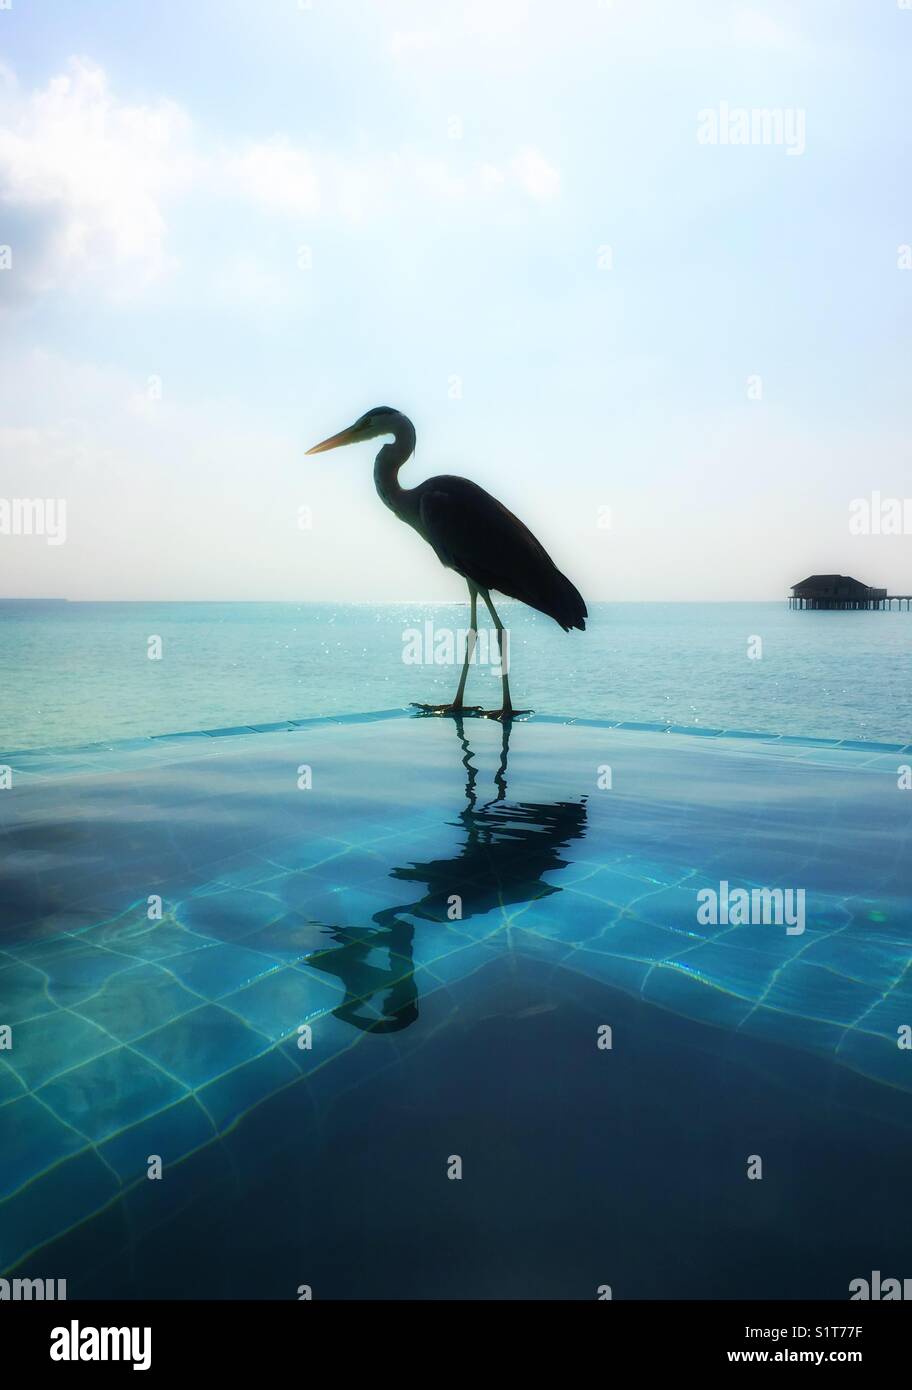 A heron standing in the side of an infinity jacuzzi, Maldives Stock Photo